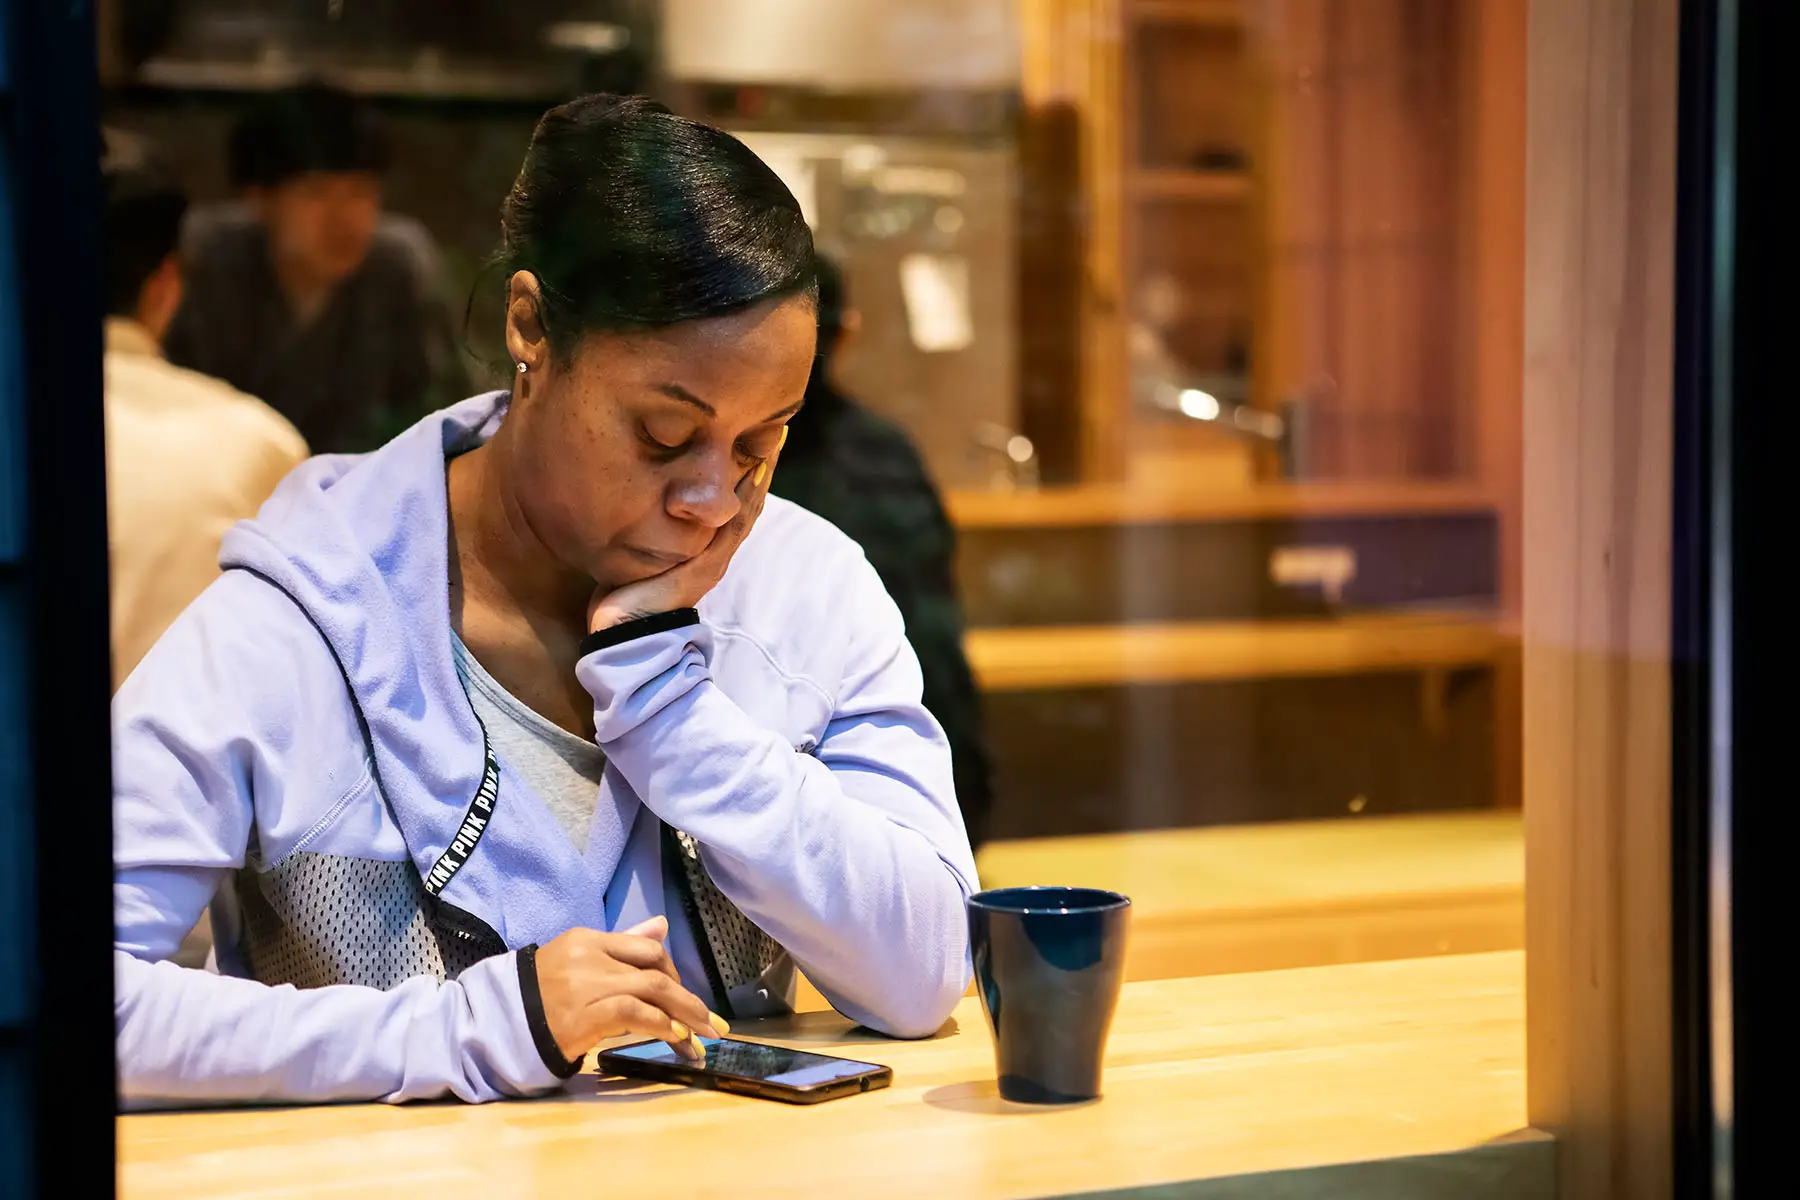 Woman looking down at her phone while waiting at a coffee house.